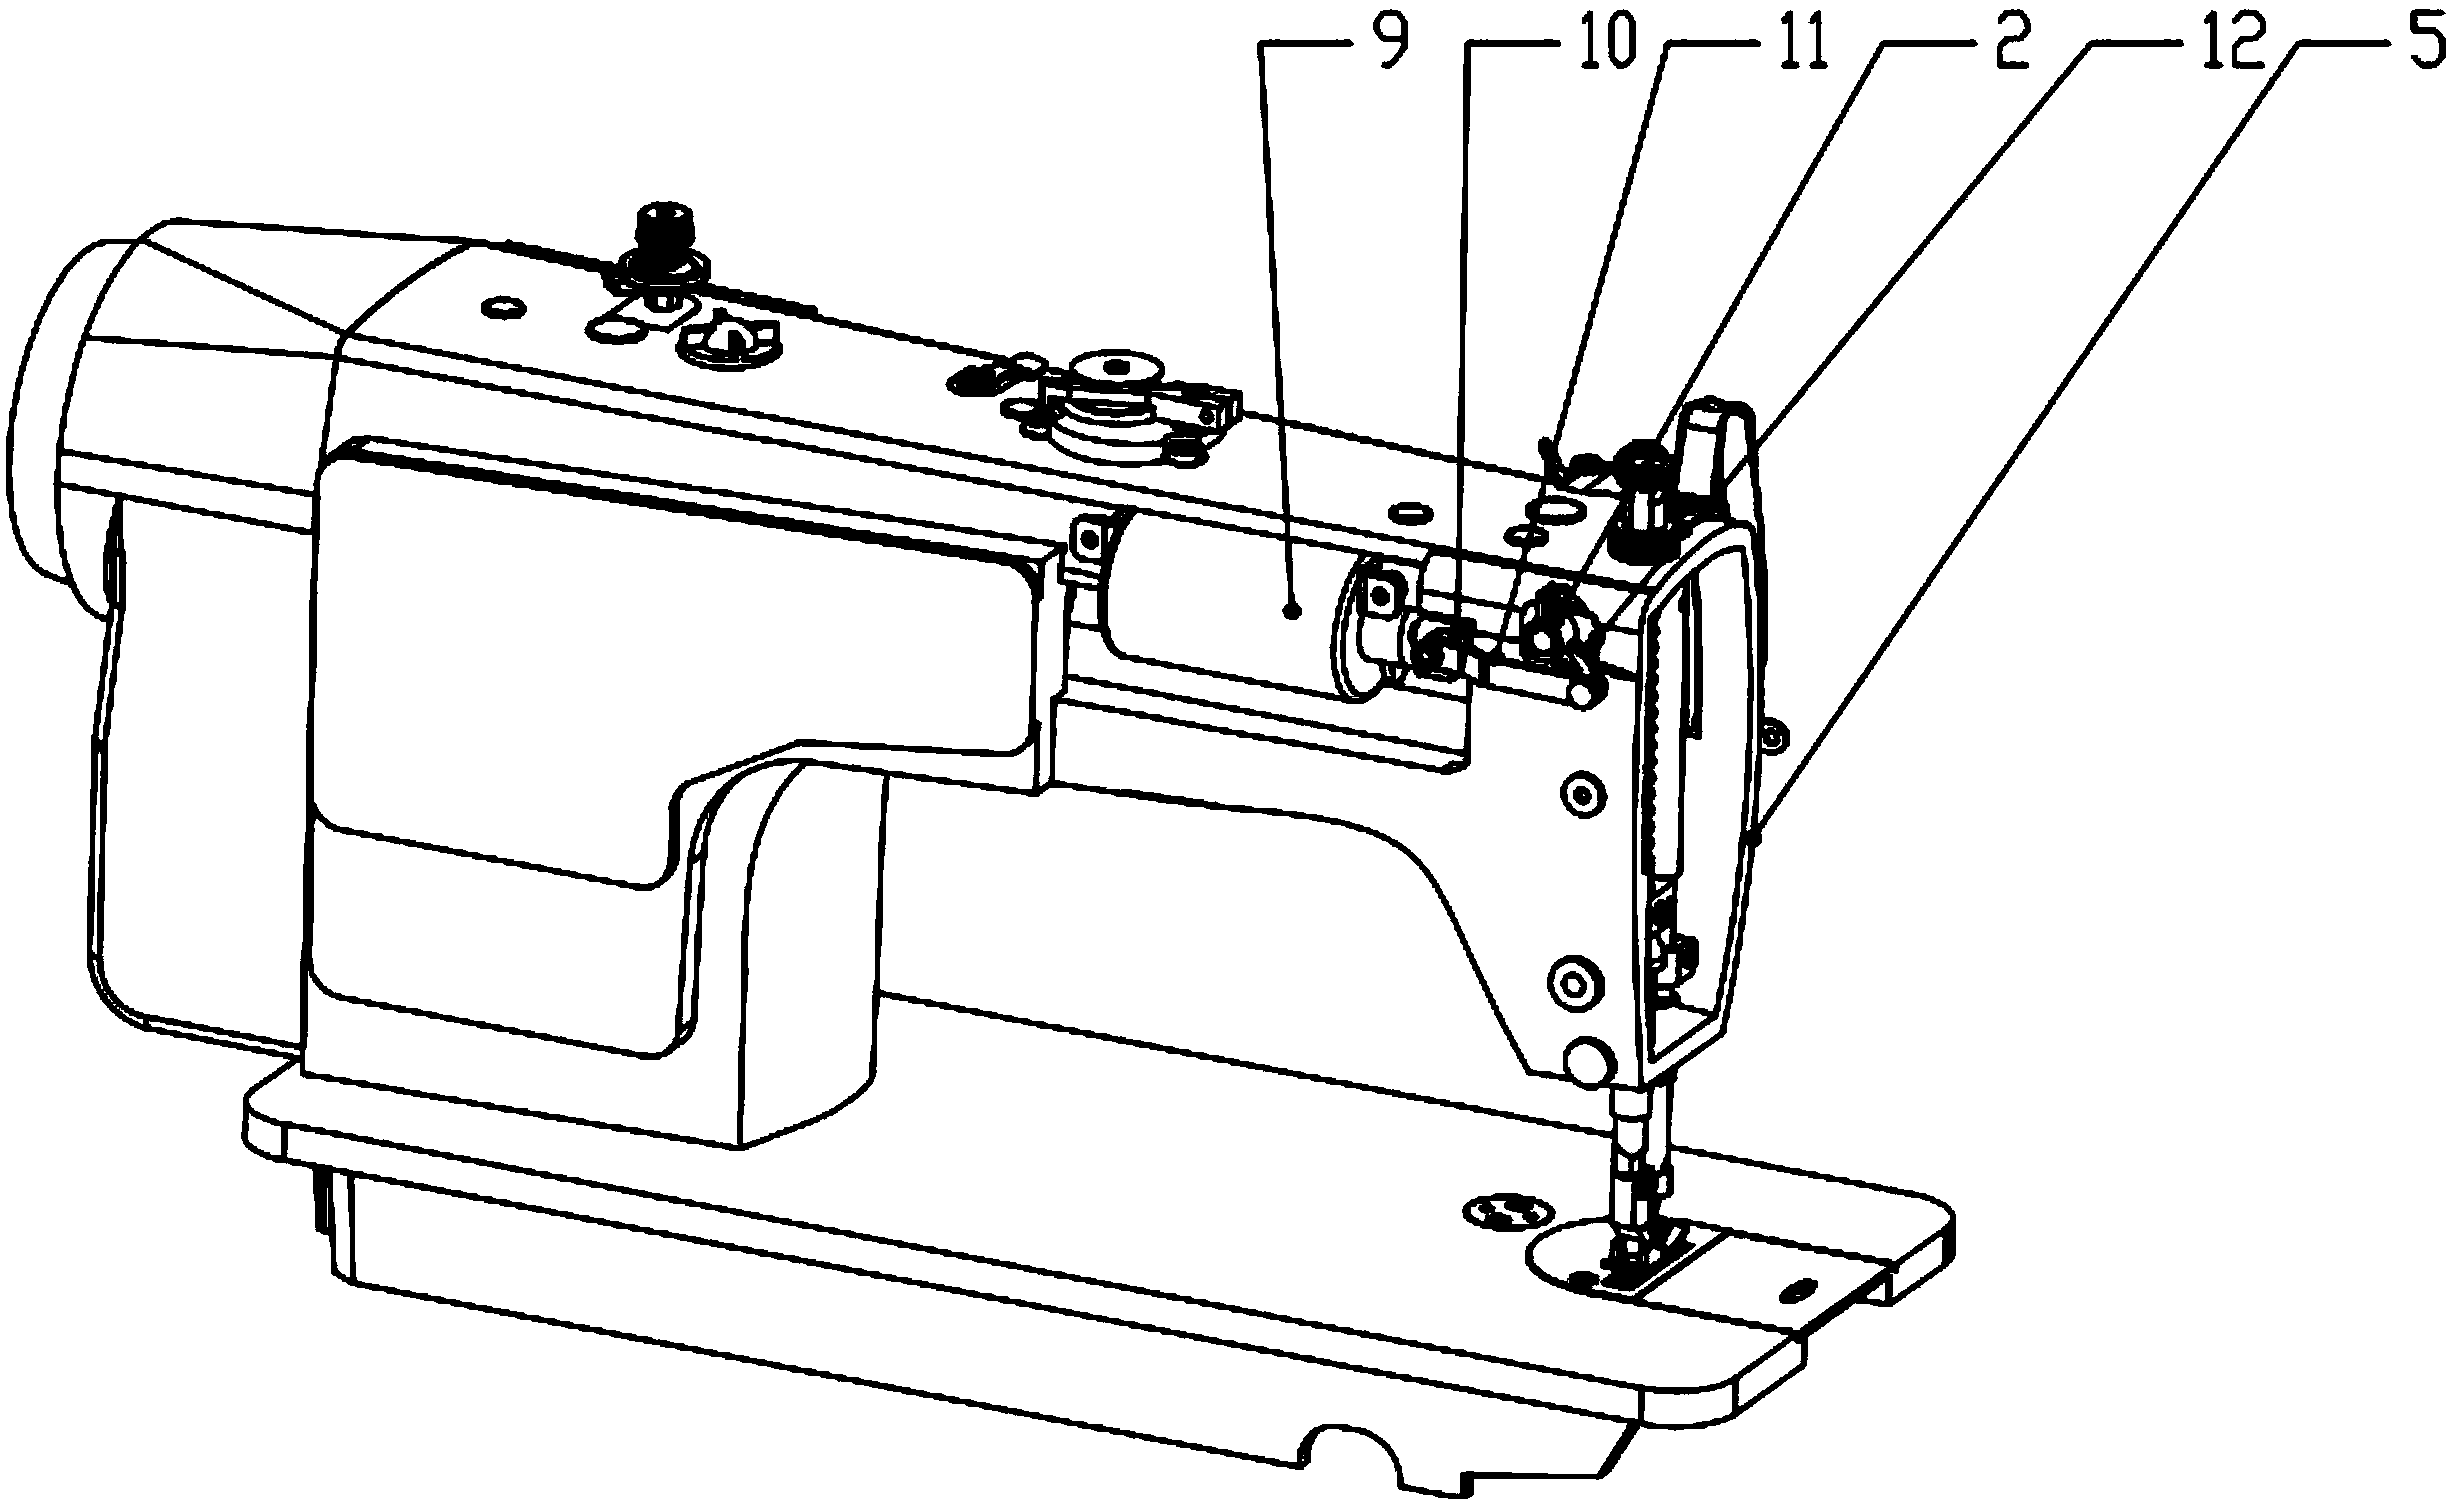 Sewing machine frame and sewing machine pressor foot lifting device thereof